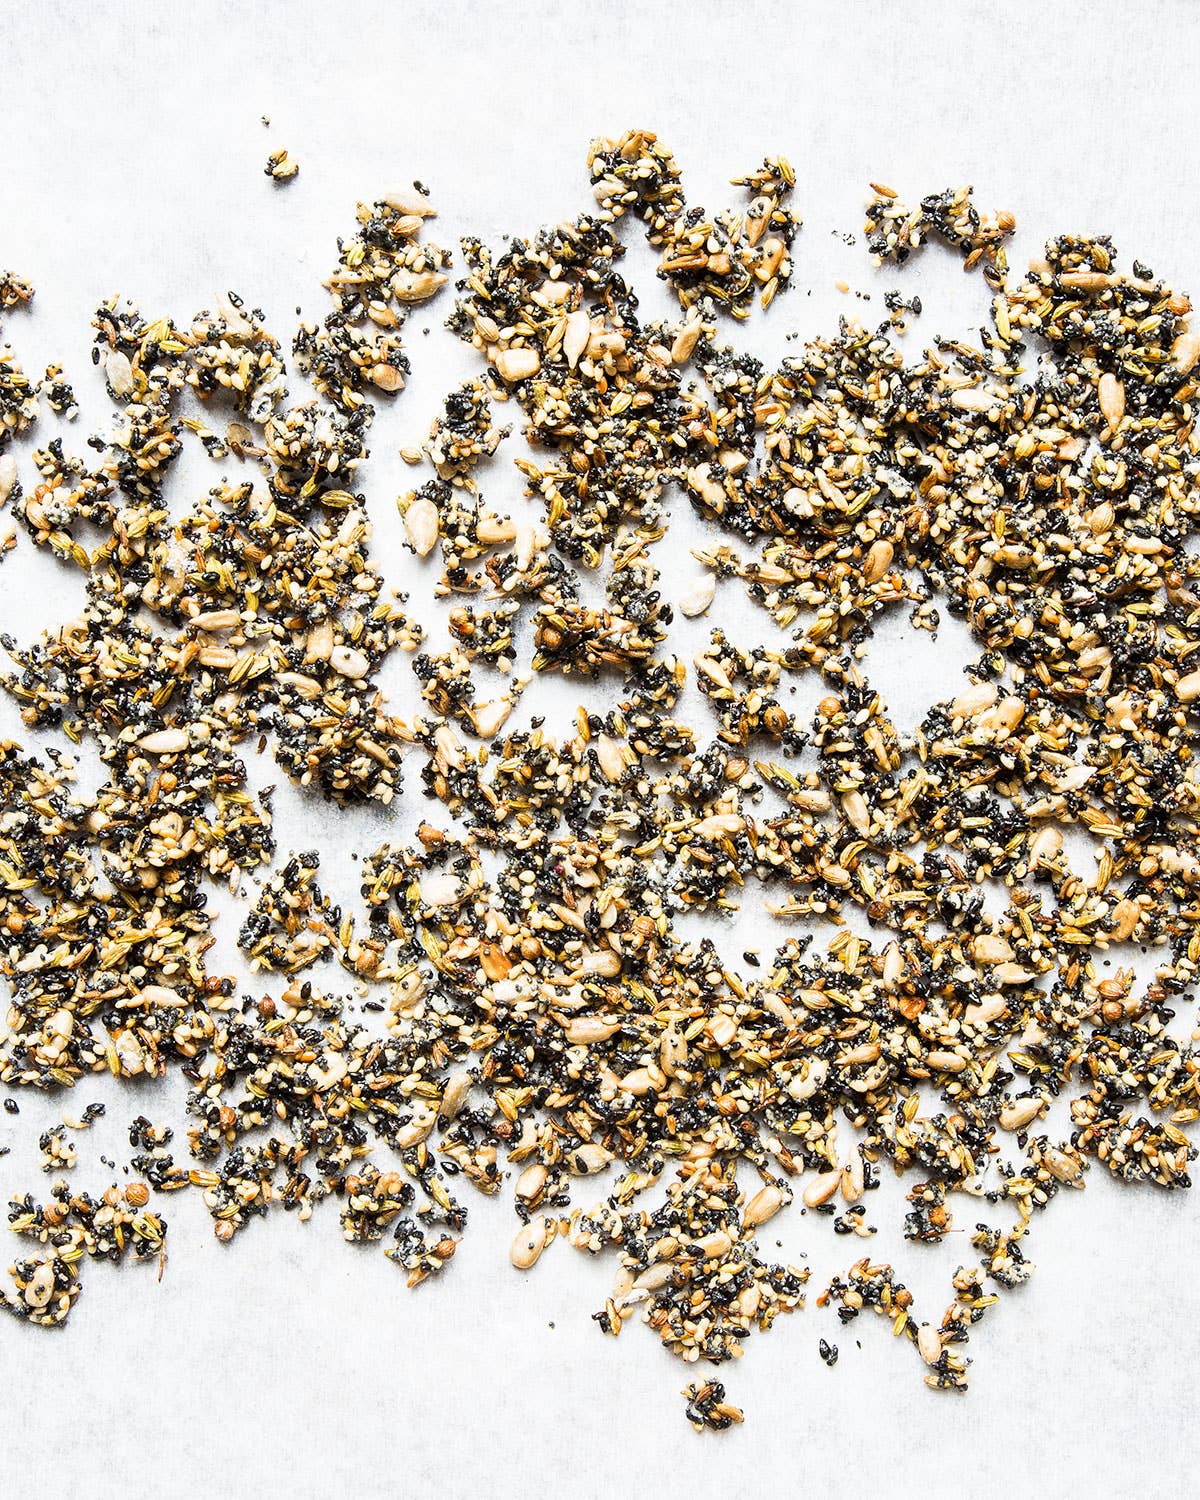 Video: Making Toasted Seed Mix with Benjamin Sukle